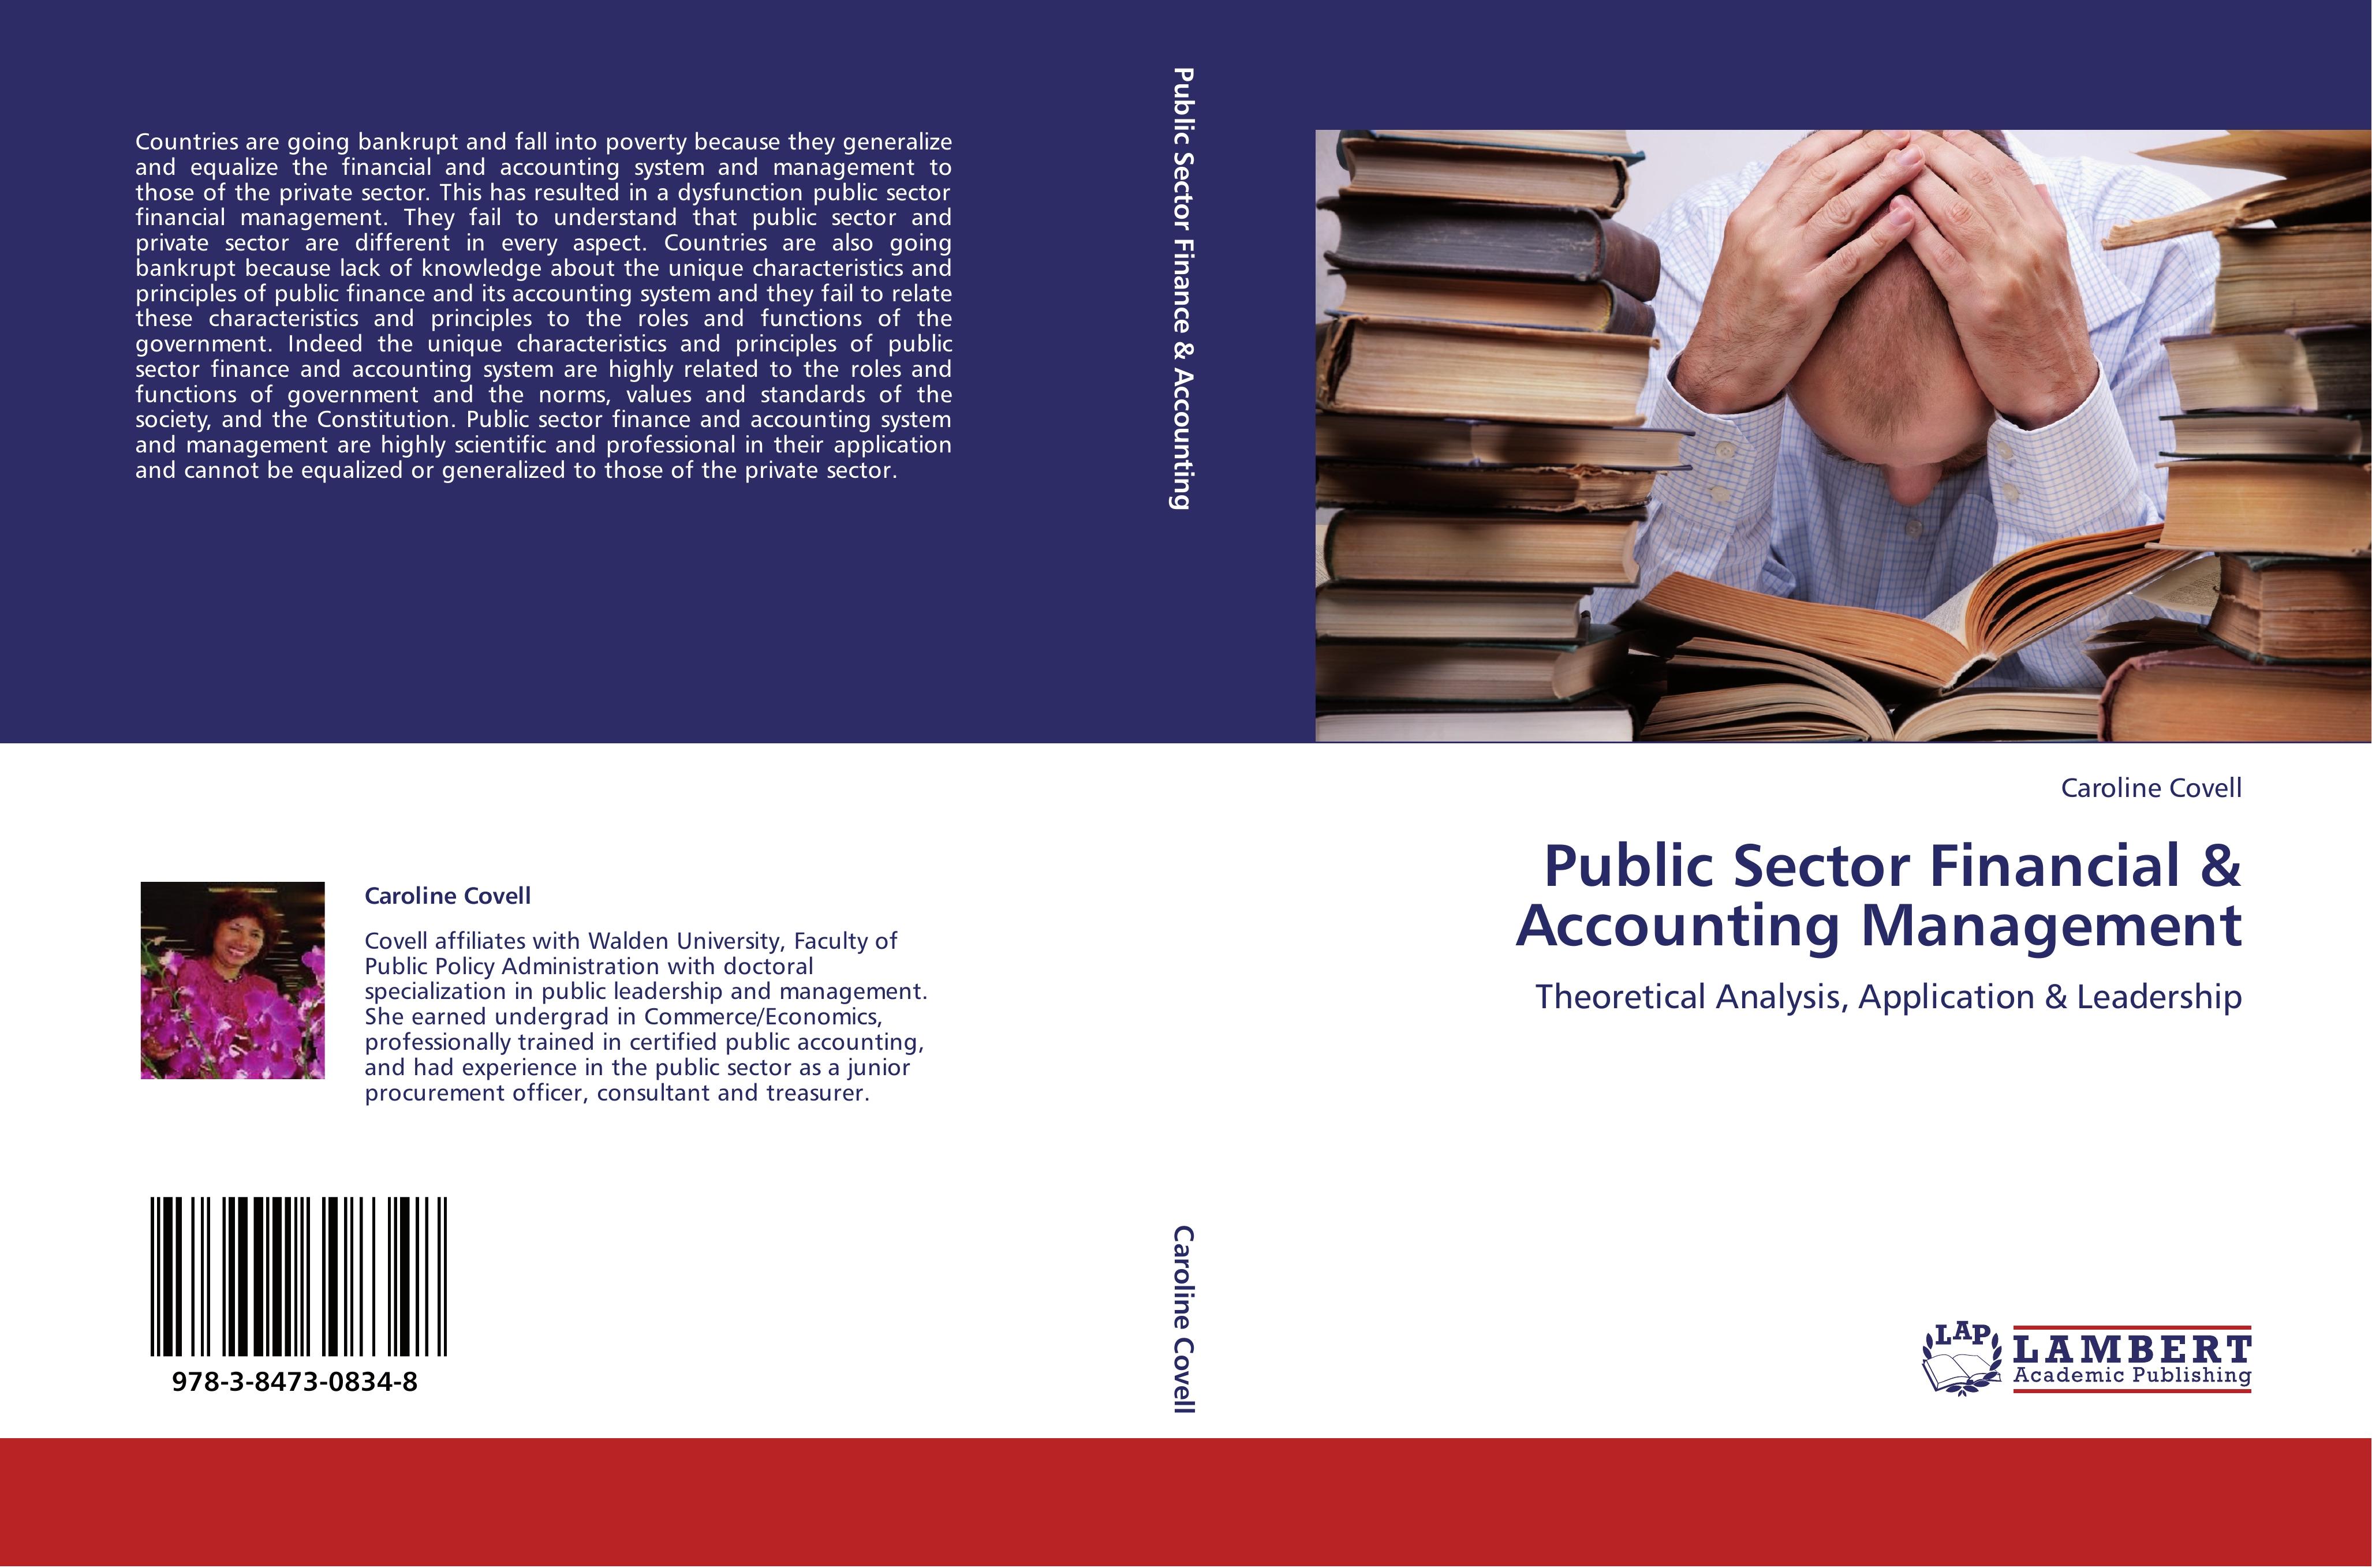 Public Sector Financial & Accounting Management / Theoretical Analysis, Application & Leadership / Caroline Covell / Taschenbuch / Paperback / 632 S. / Englisch / 2012 / EAN 9783847308348 - Covell, Caroline